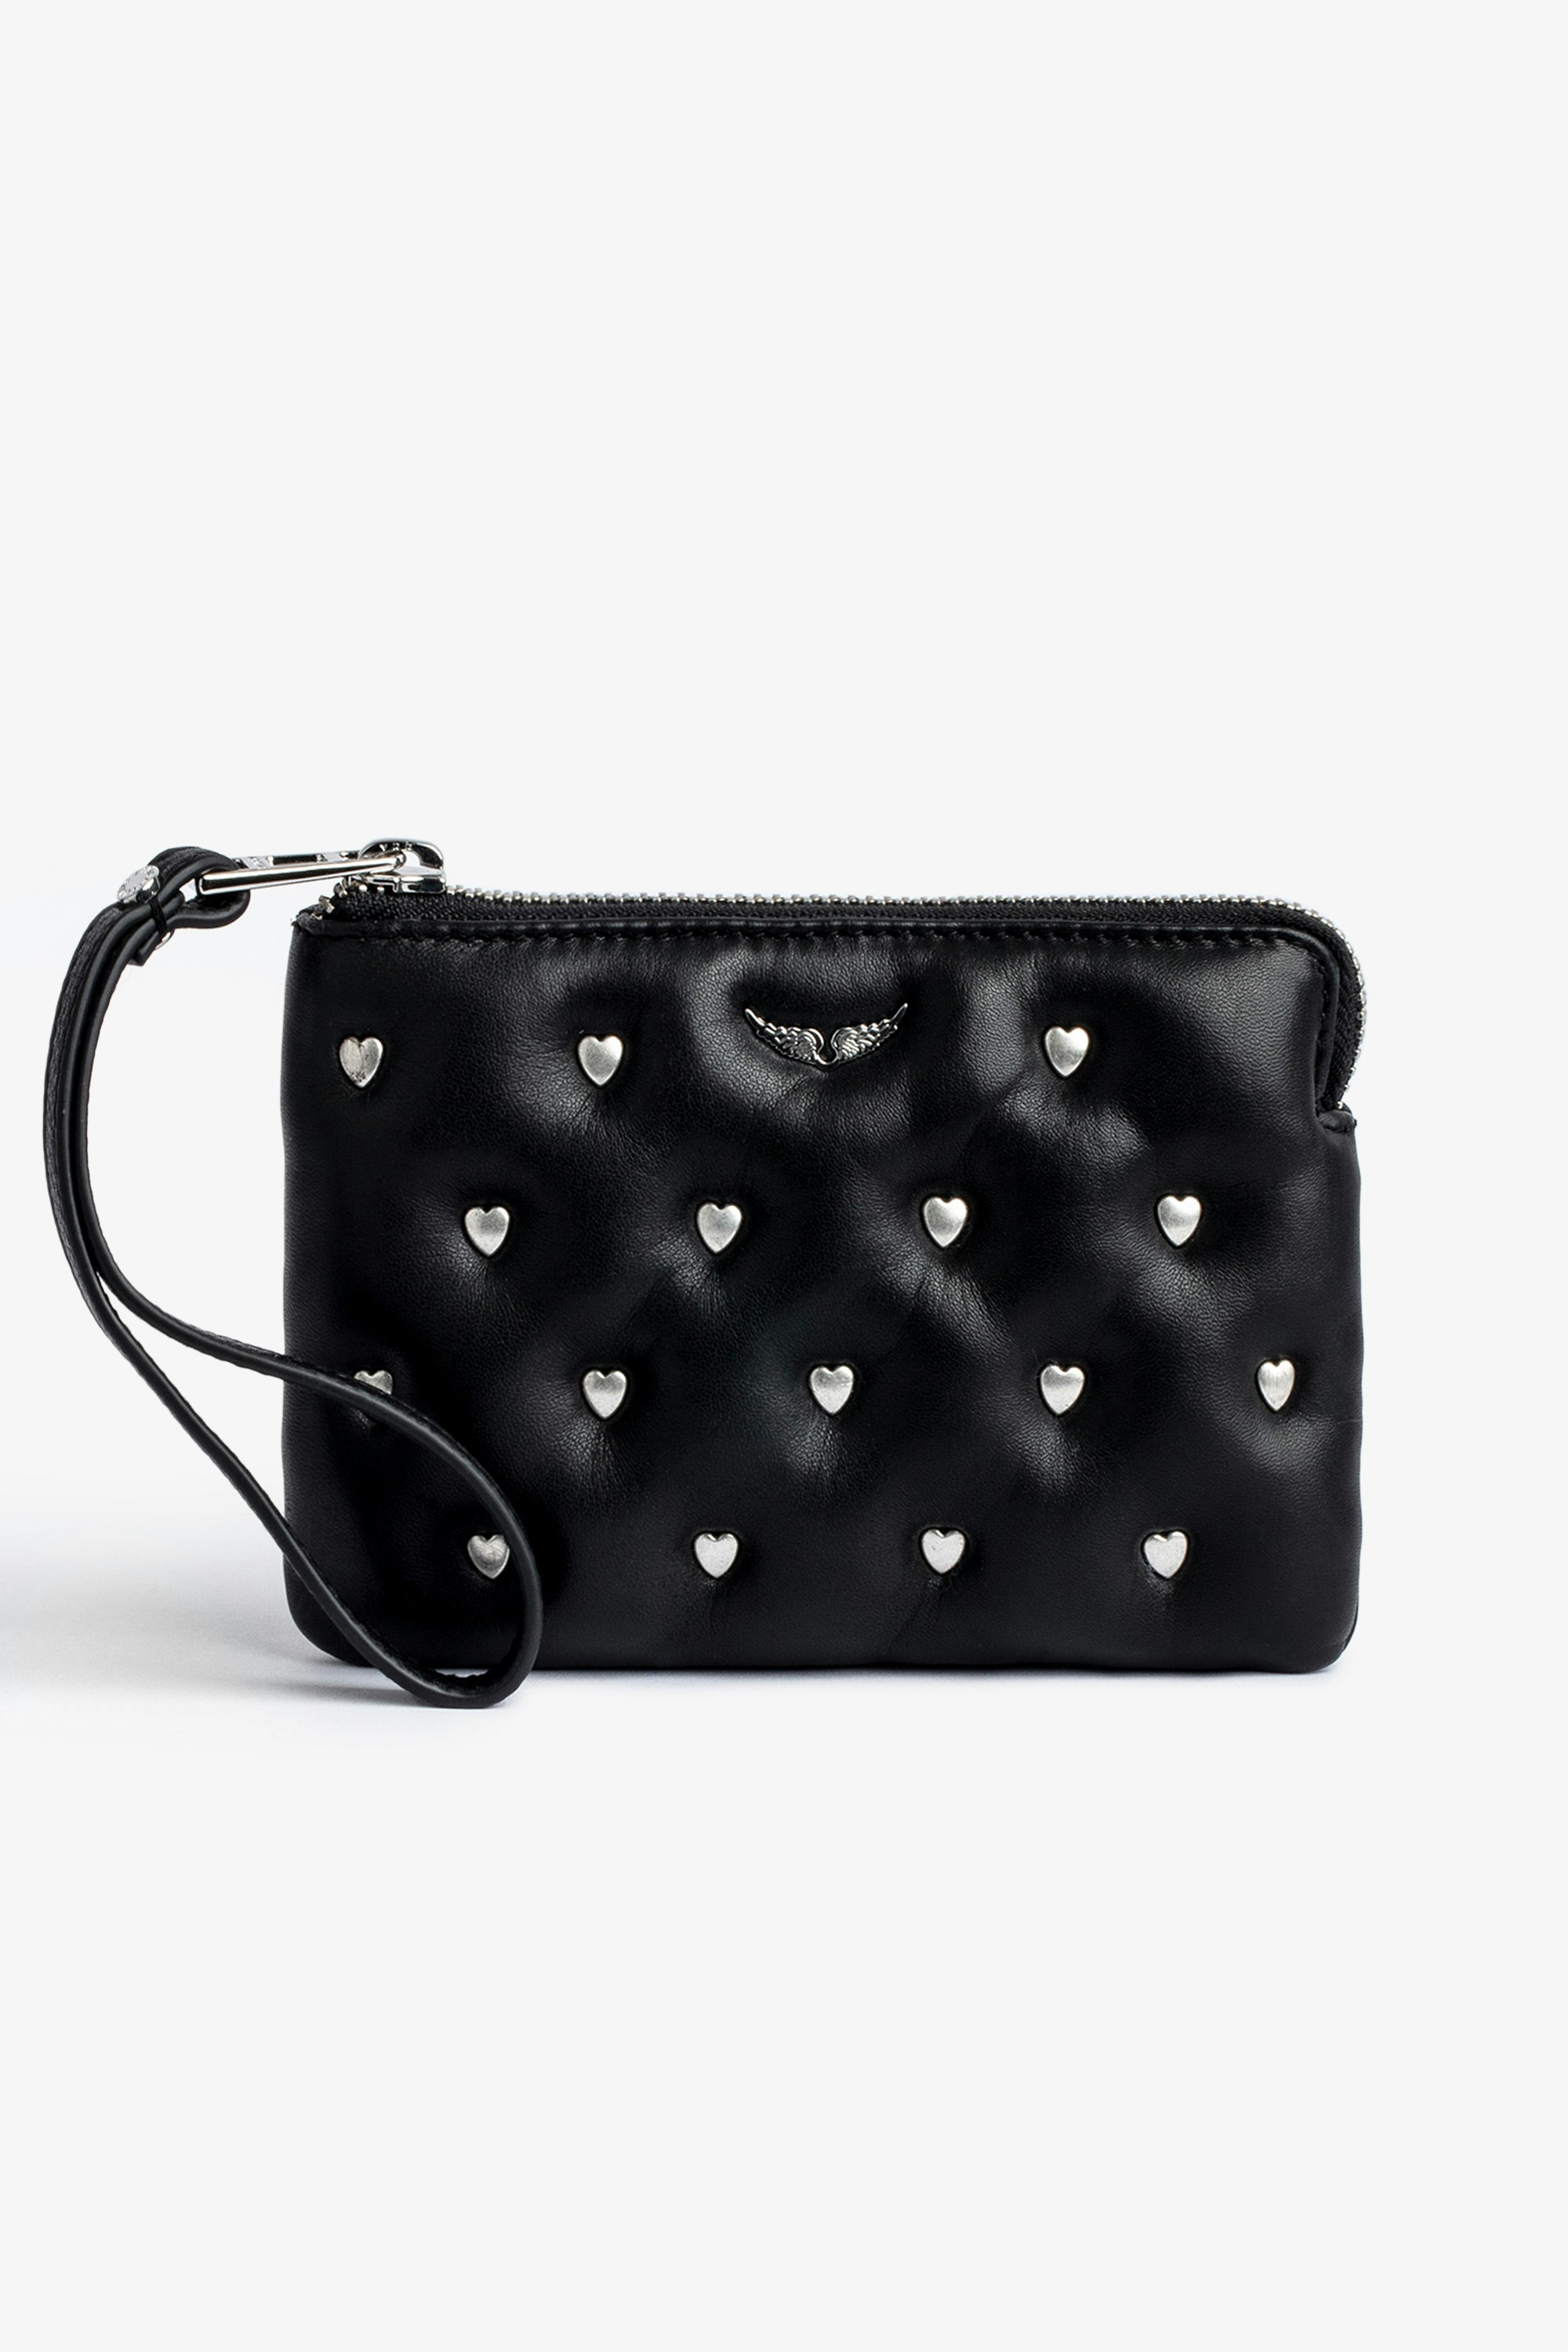 Mini Uma クラッチバッグ Women’s small clutch in black smooth leather with heart studs